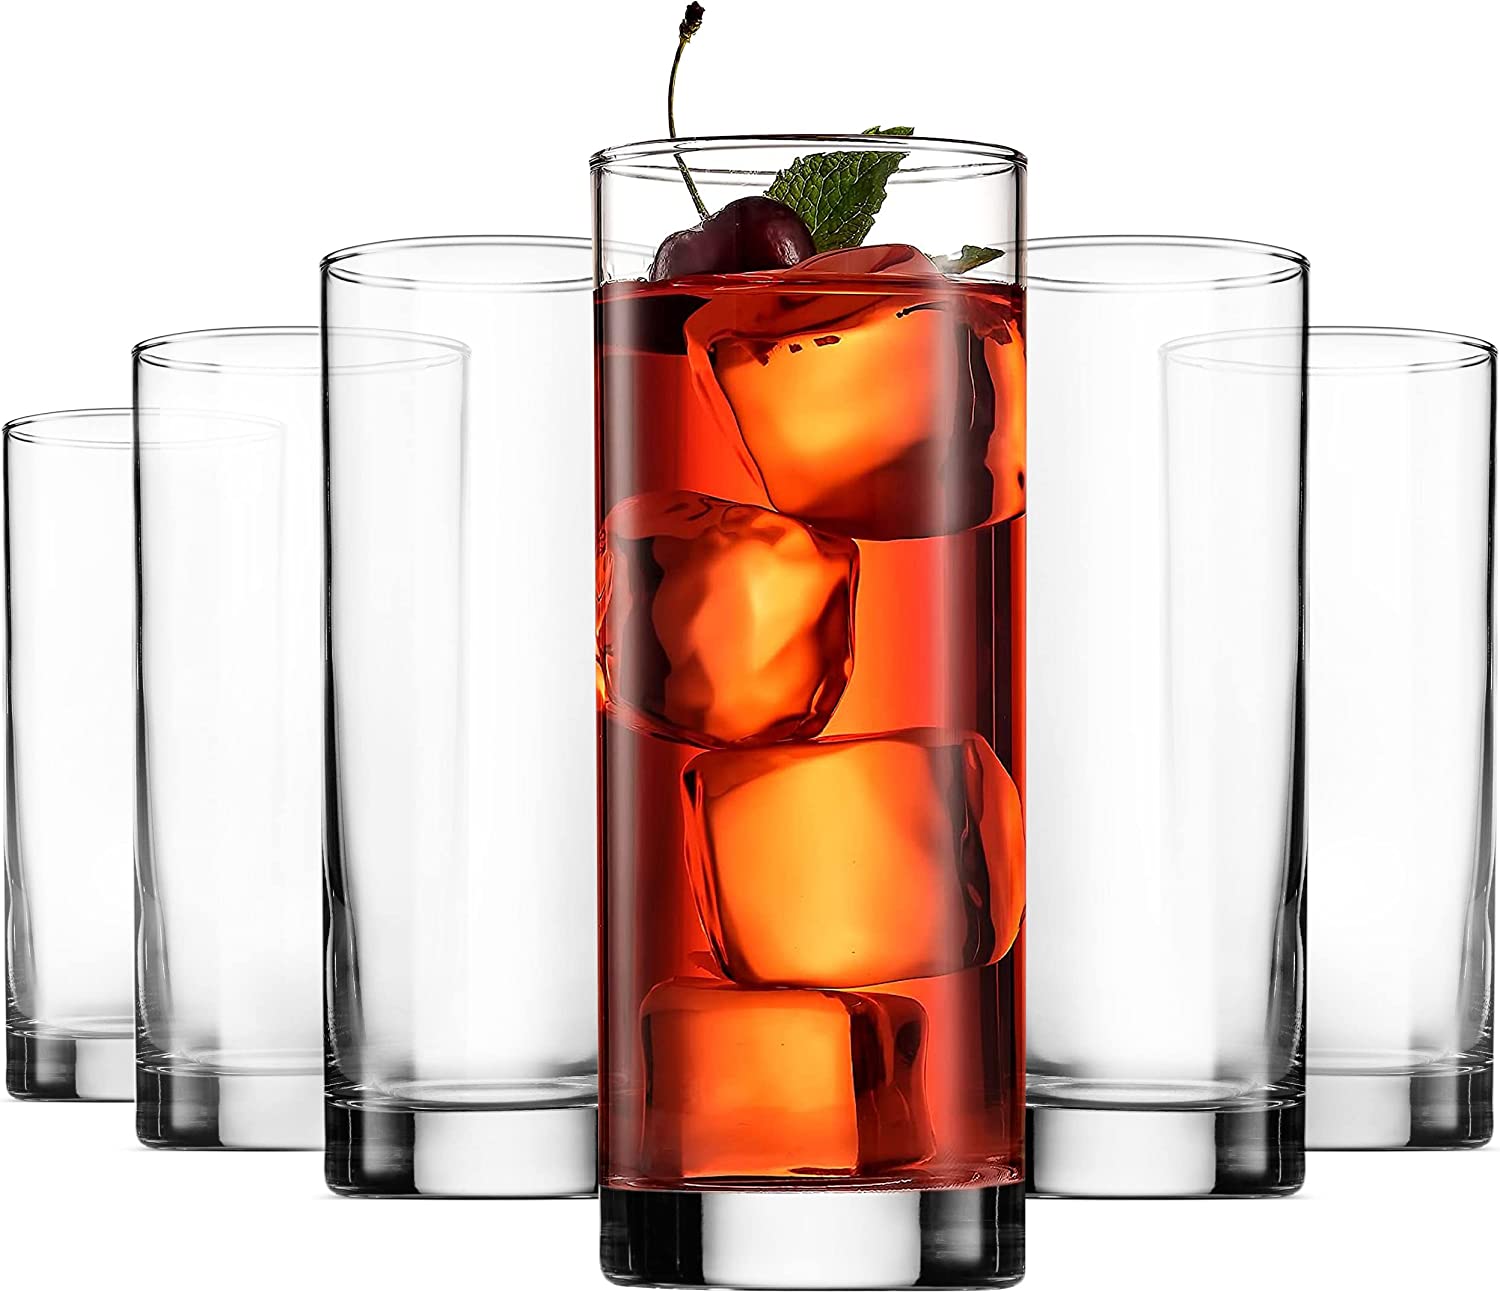 https://www.dontwasteyourmoney.com/wp-content/uploads/2023/03/paksh-novelty-thick-clear-base-highball-glasses-6-piece-highball-glasses.jpg